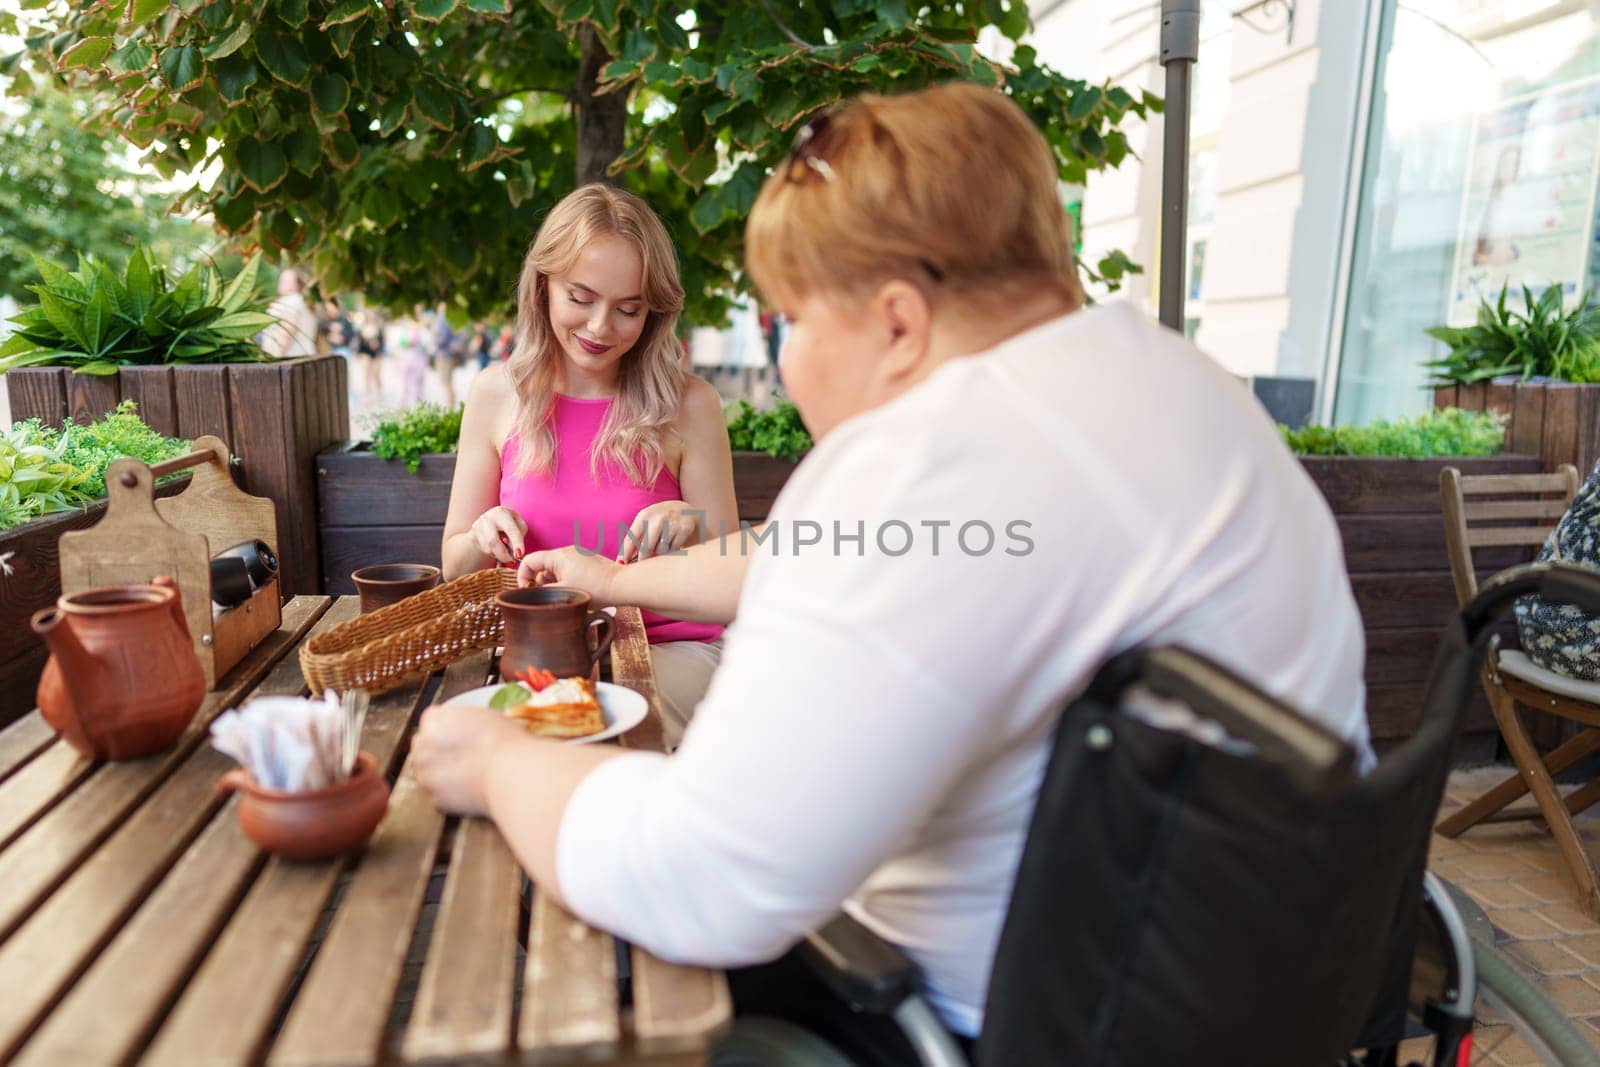 Woman wheelchair user dining at a restaurant with her young daughter. by Fabrikasimf